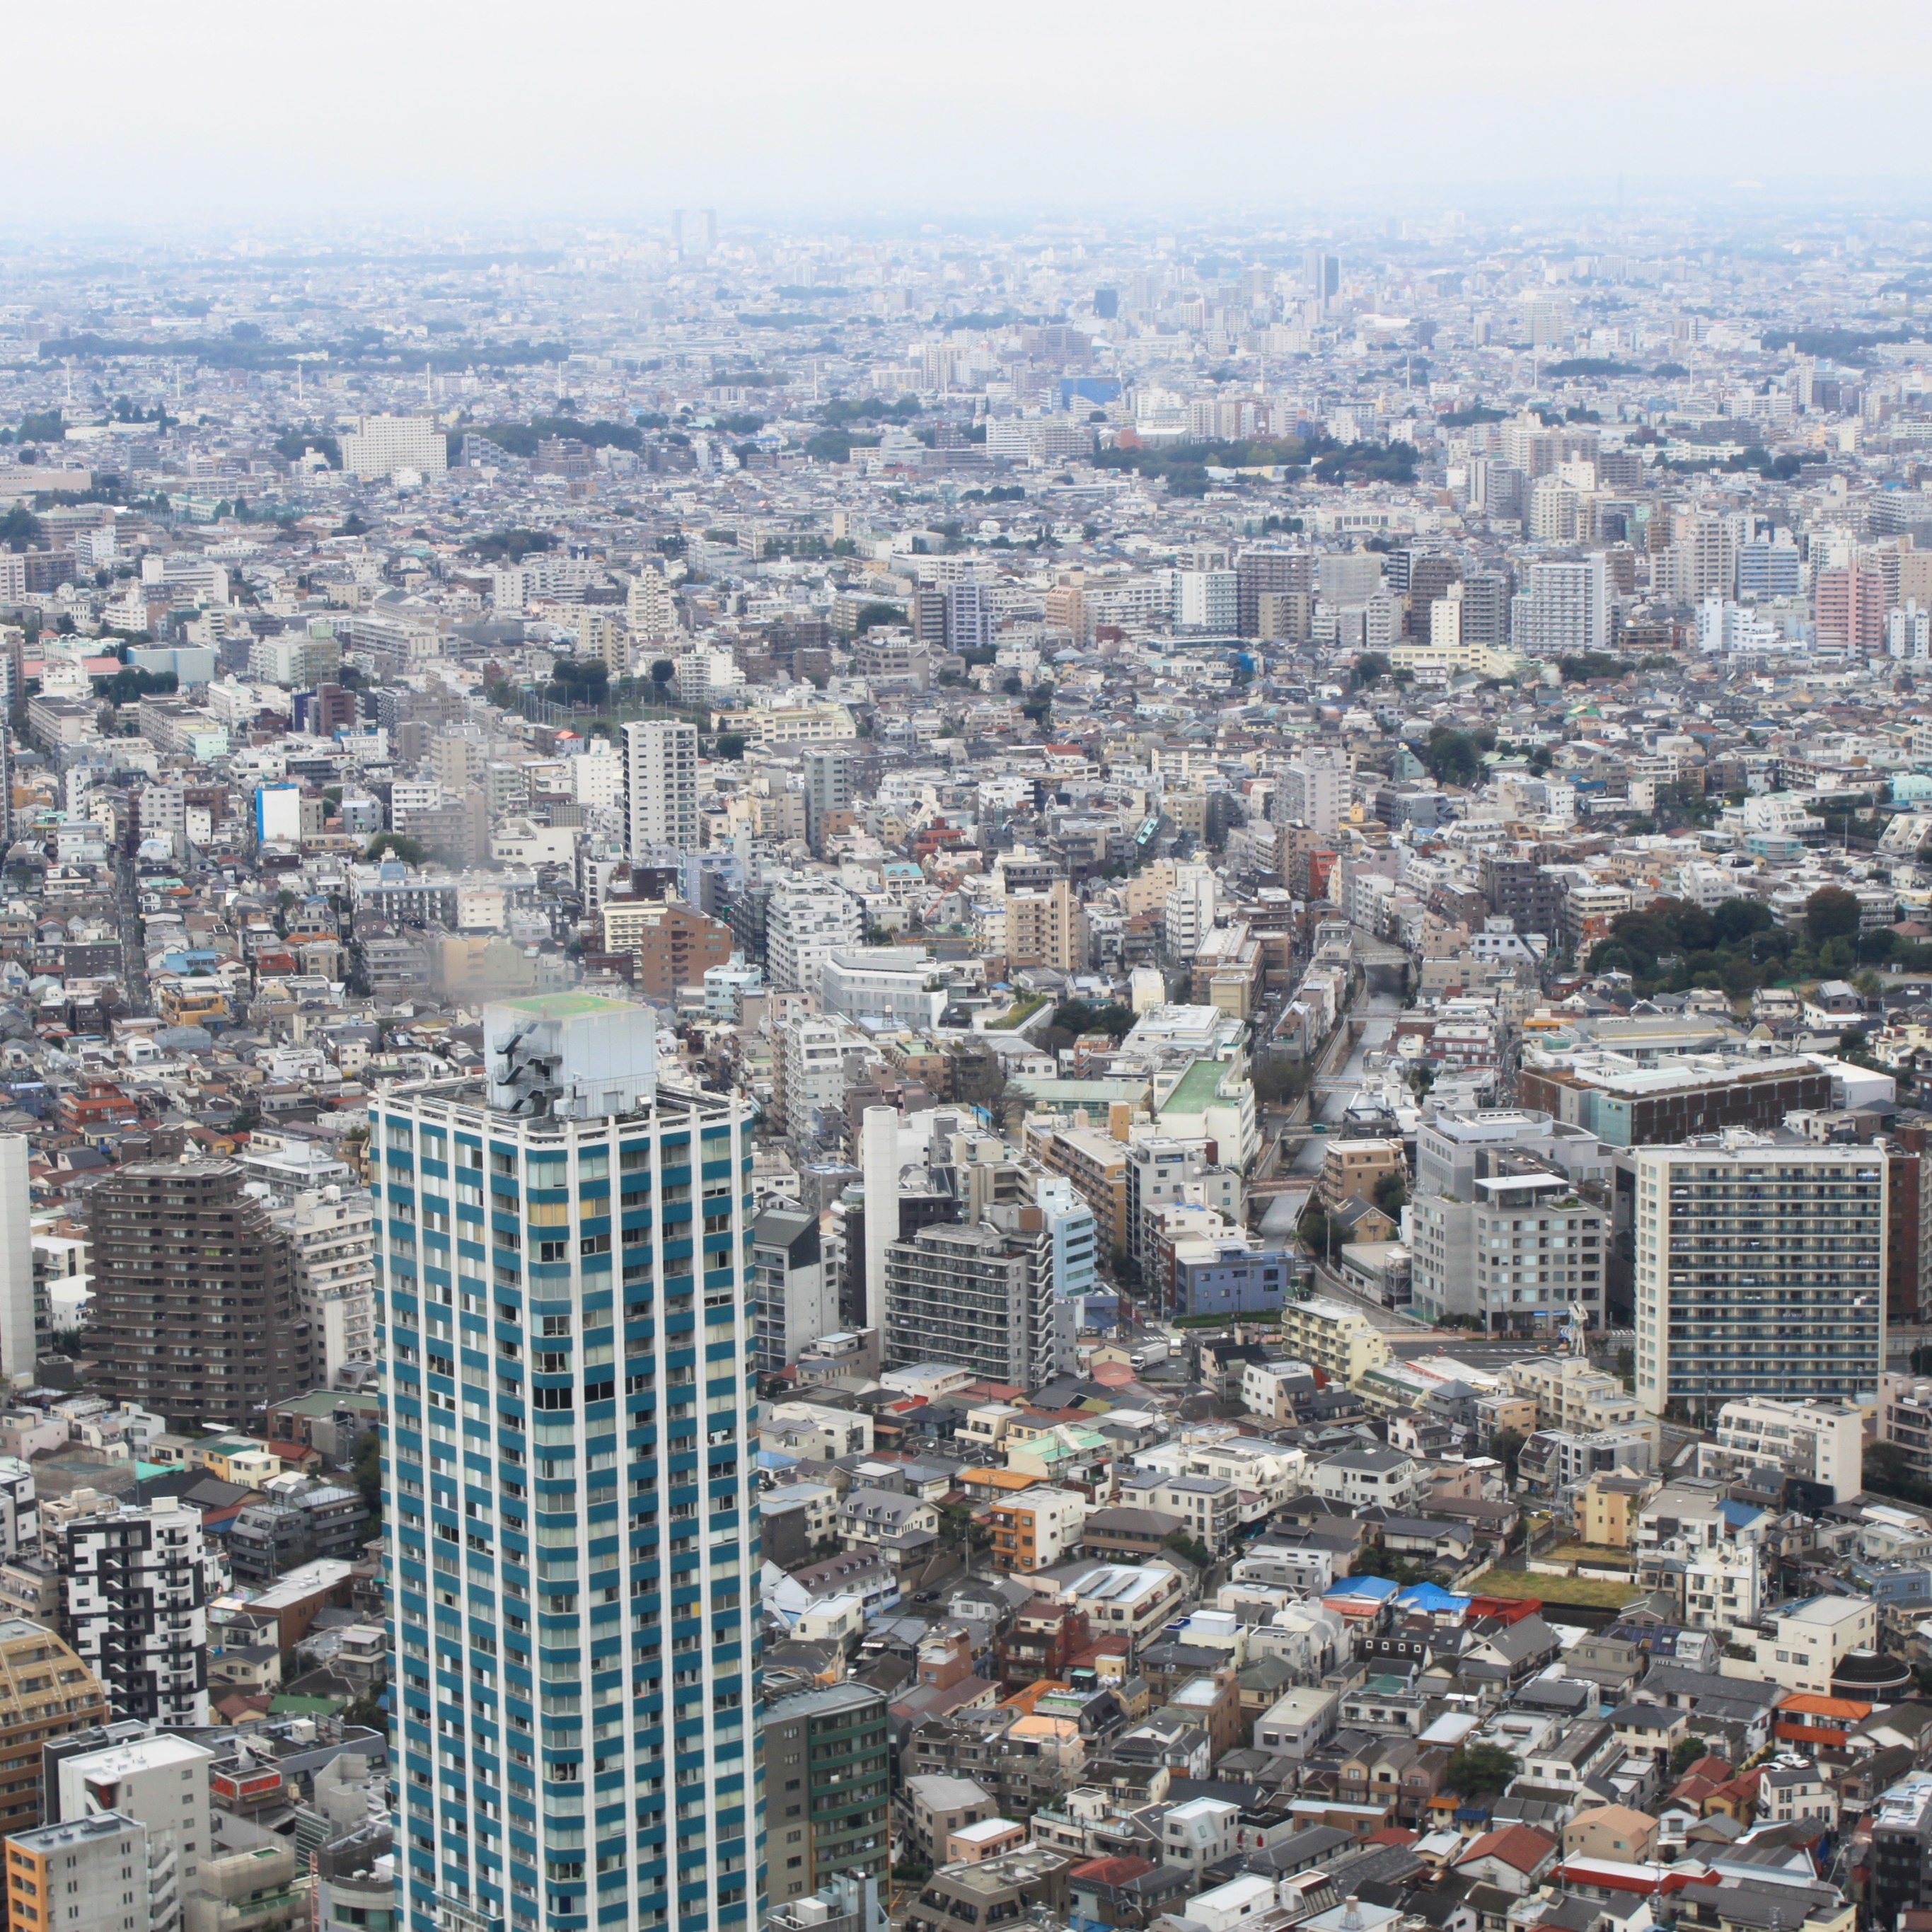 Views from the Tokyo Metropolitan Government Building